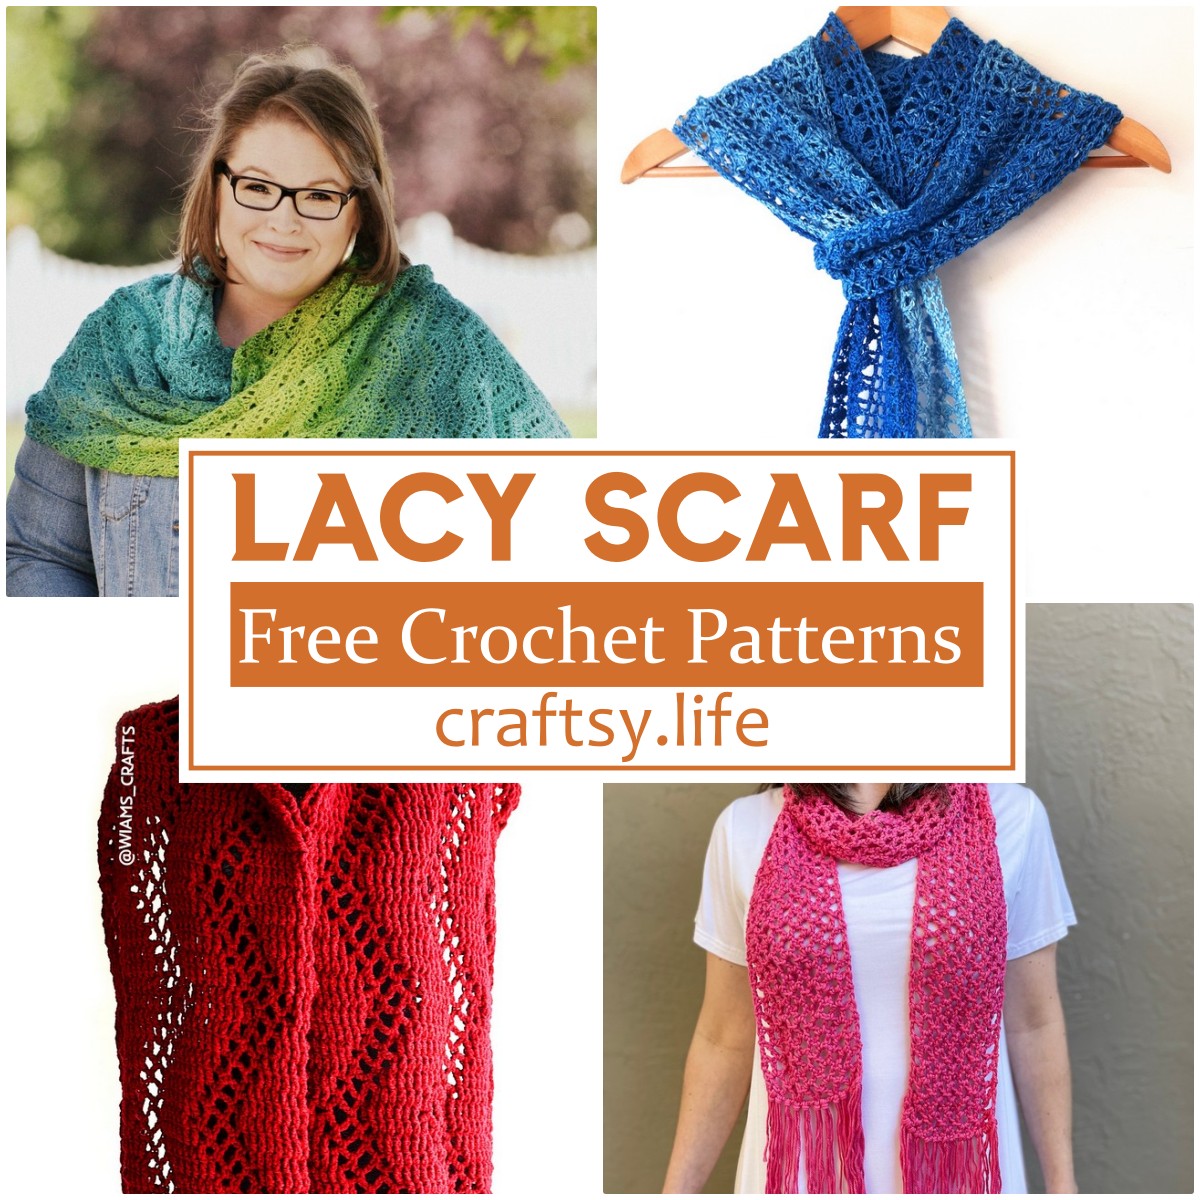 Easy Lacy Crochet Scarf Patterns